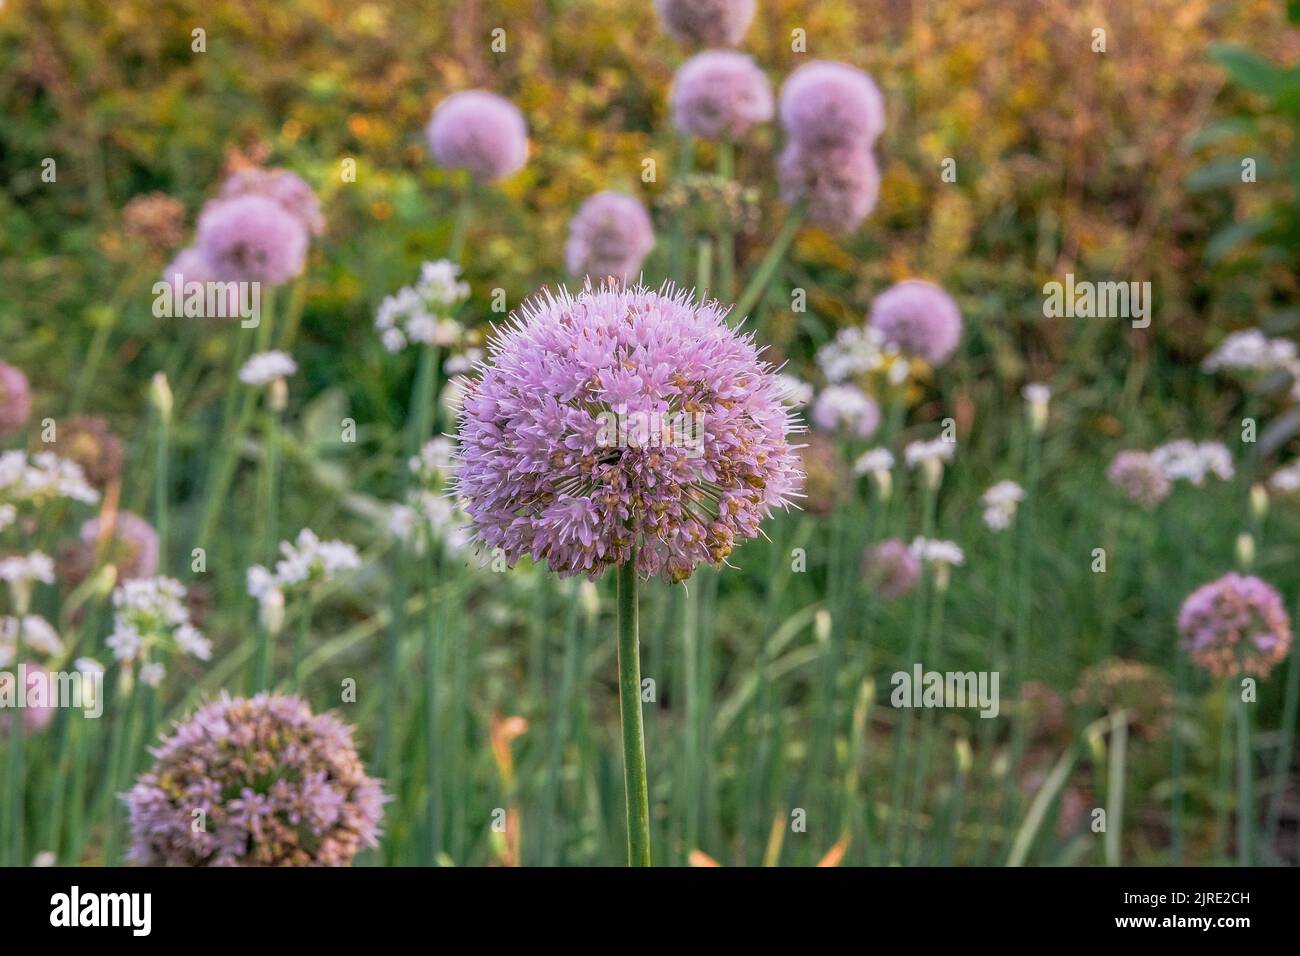 Violet onion flower in farming and harvesting. Organic vegetables grown in a rural garden. Growing vegetables at home. Stock Photo